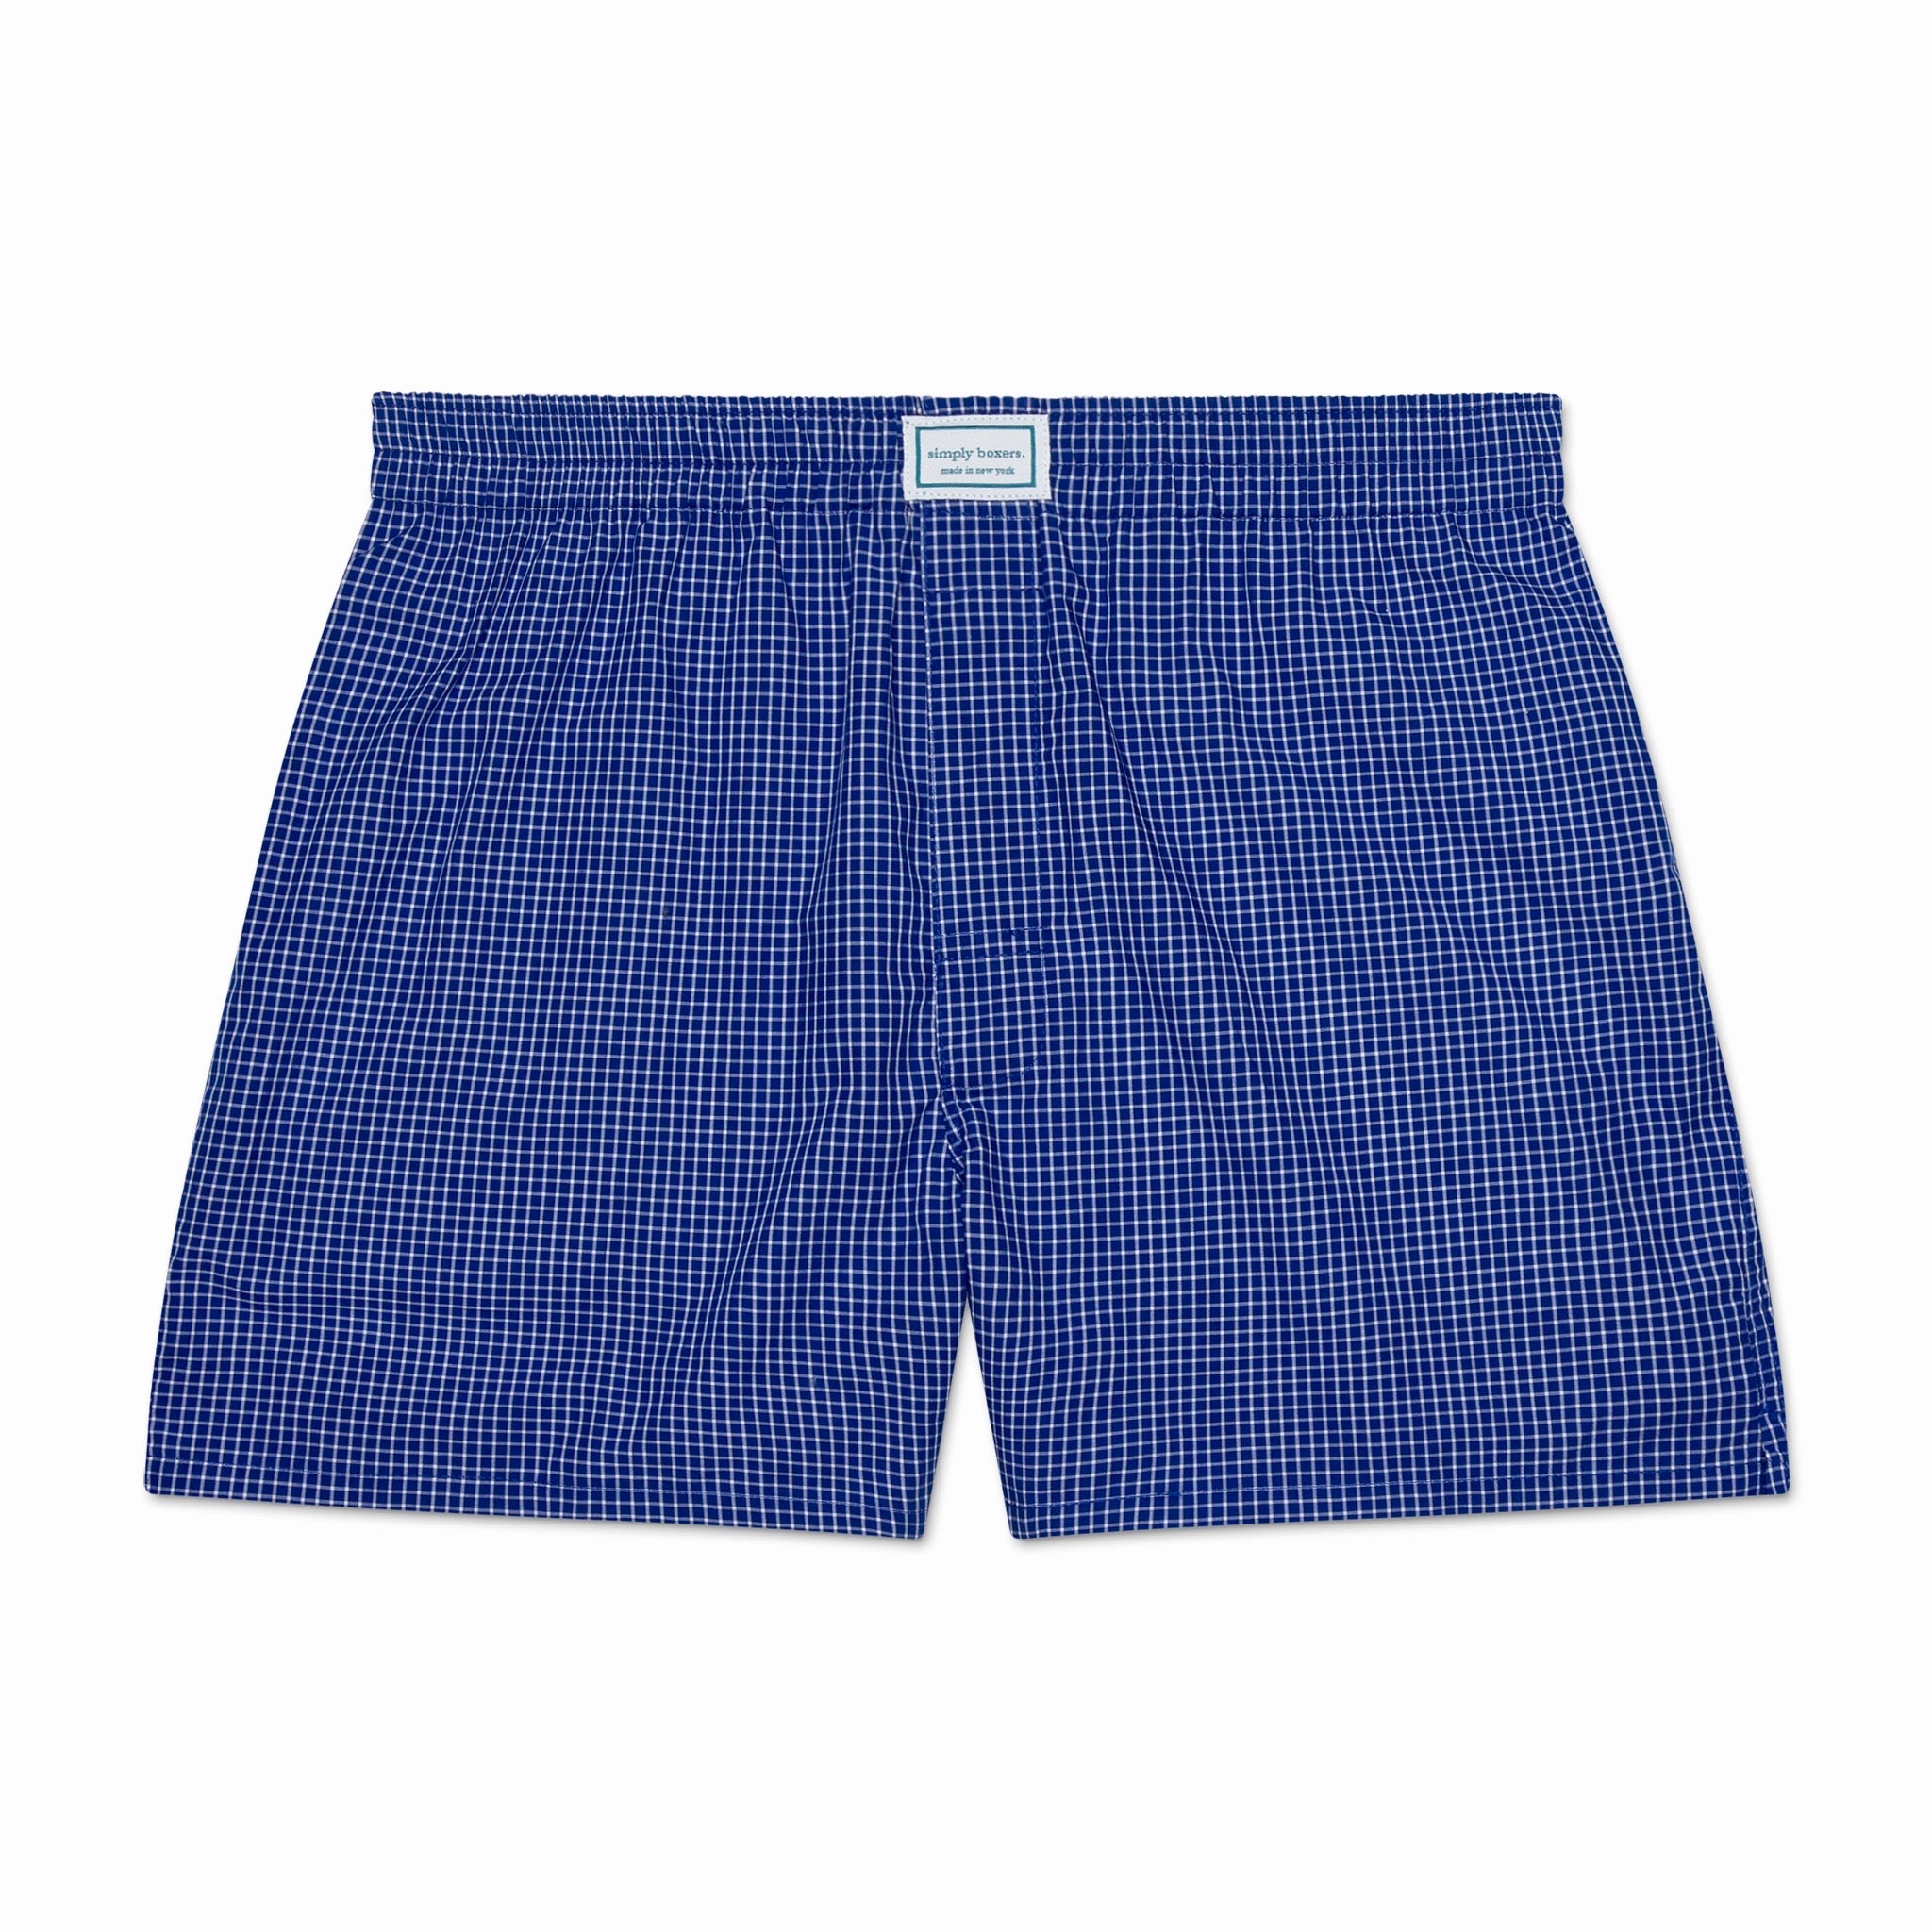 The Manhattan Collection - Men's Boxer Shorts – Simply Boxers